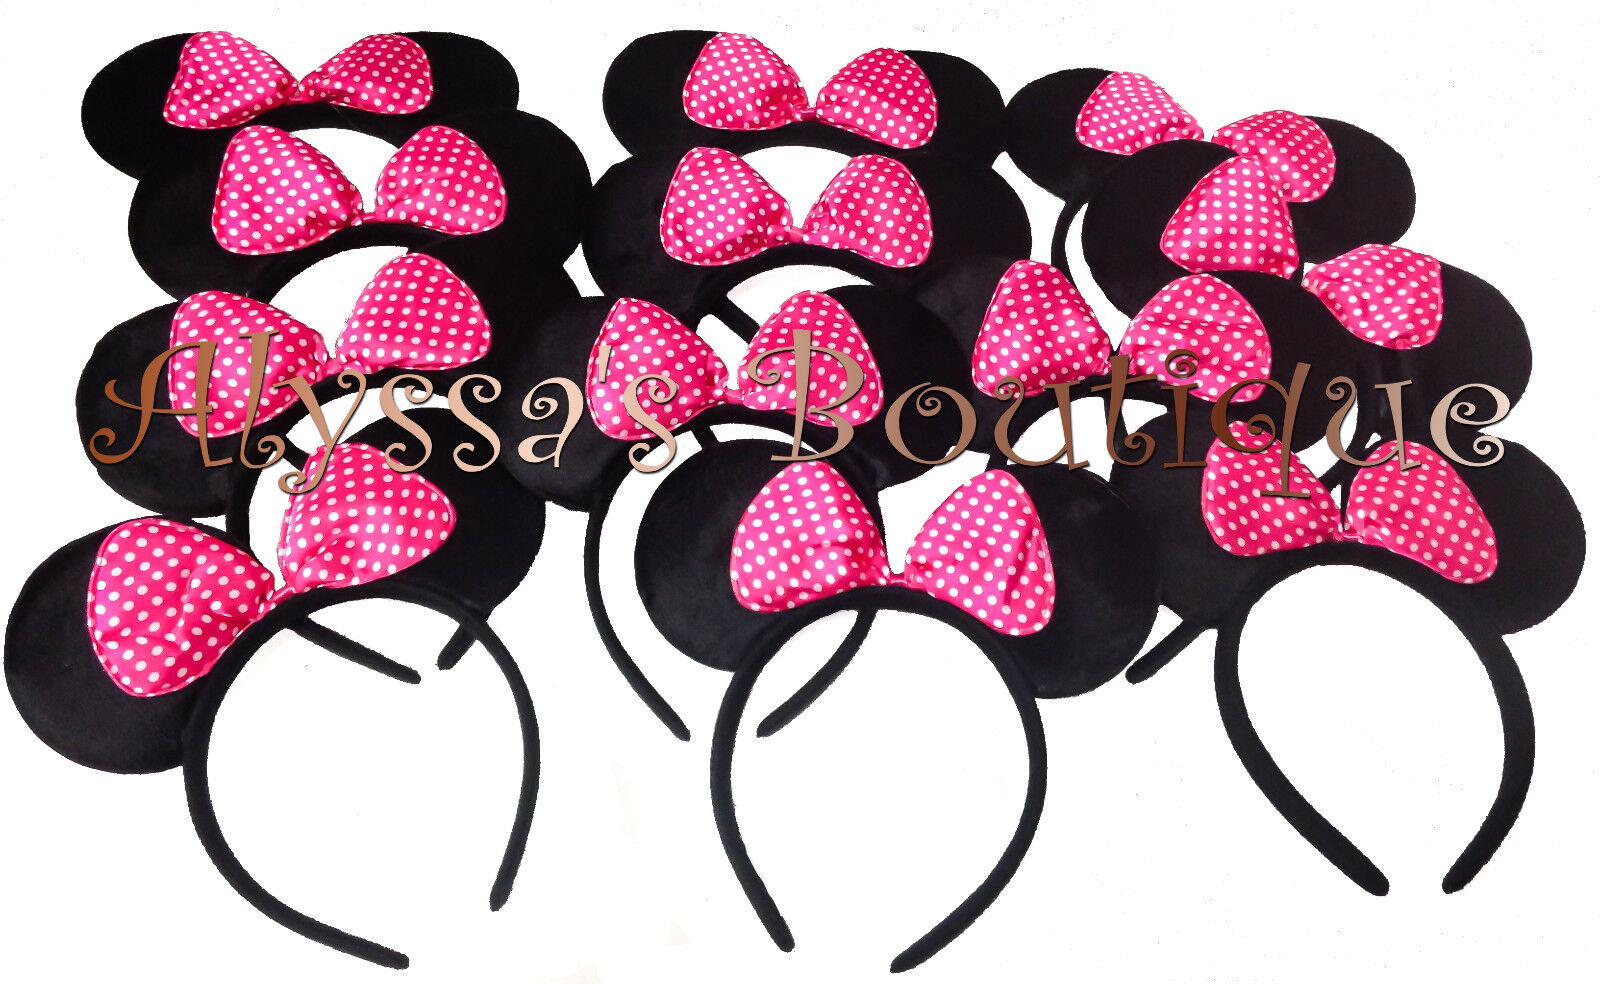 24 pcs Minnie Mickey Mouse Ears Headbands Black Pink Bow Party Favors Birthday